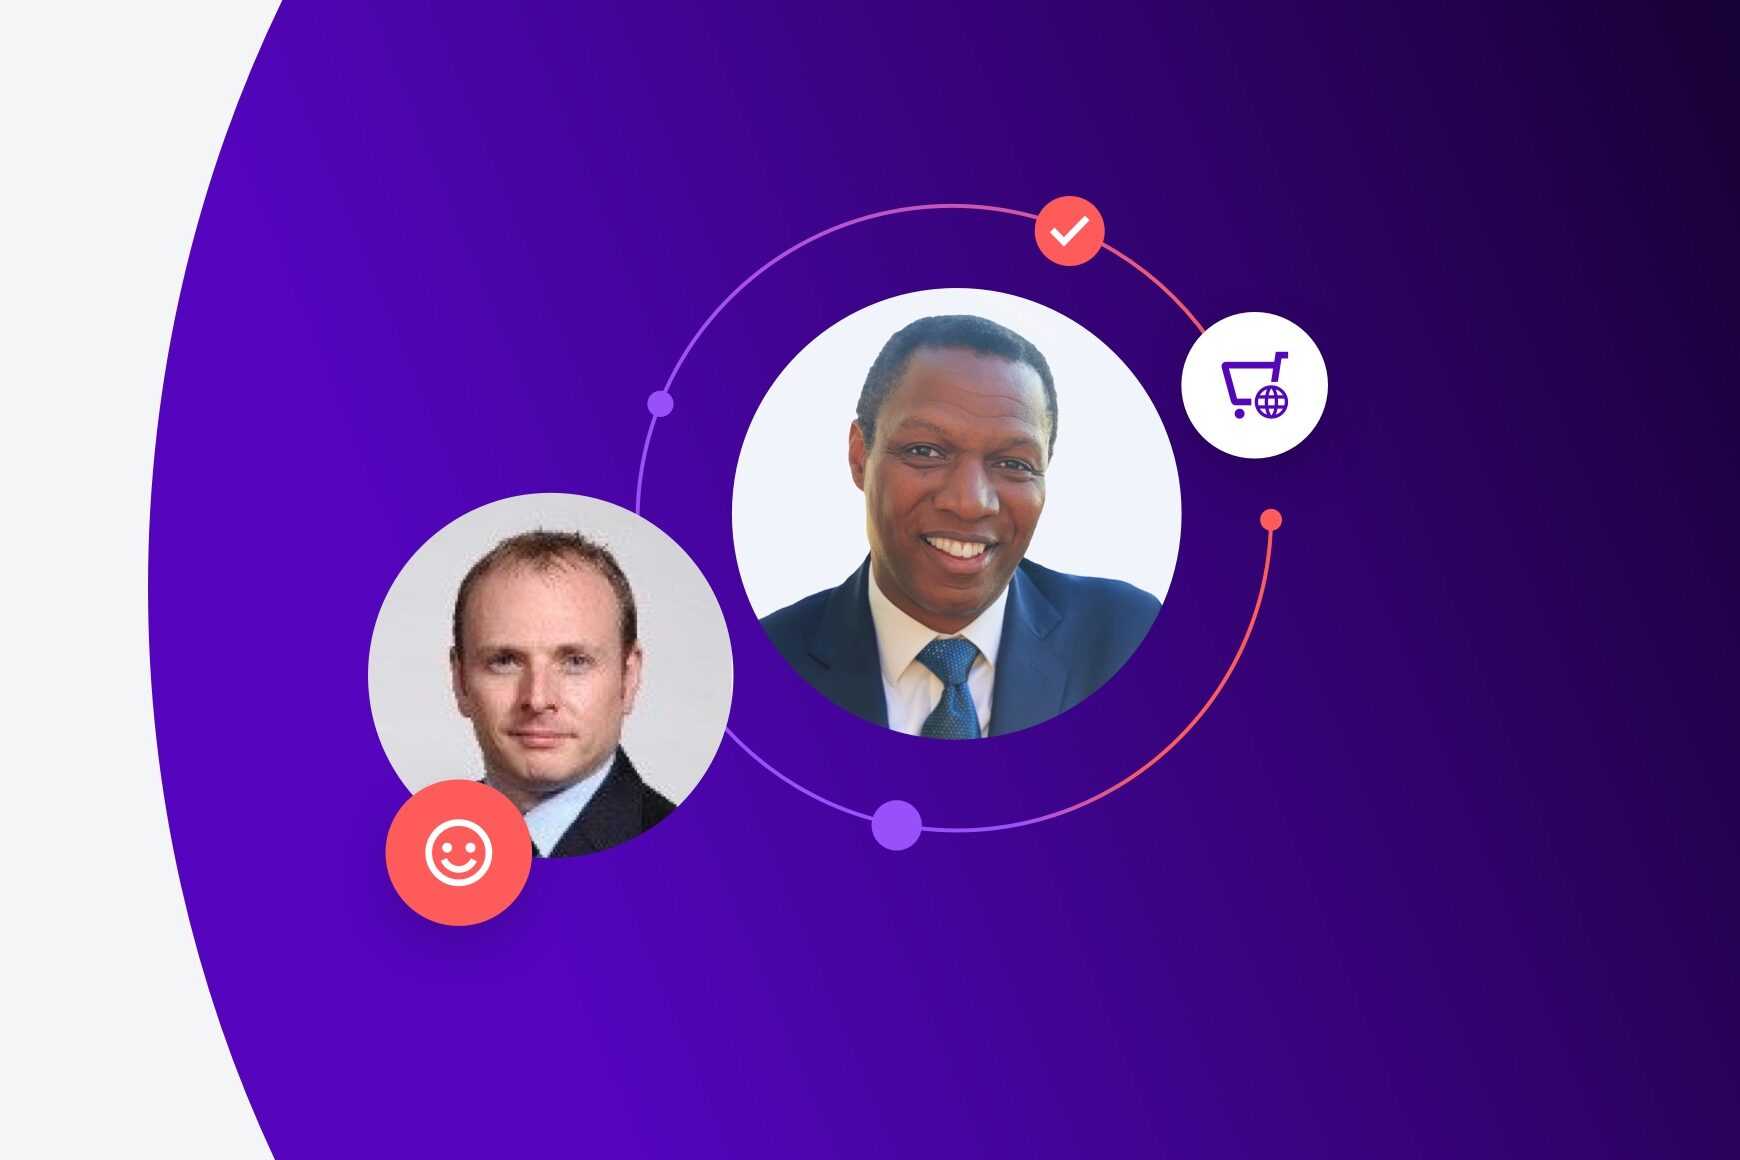 Fireside chat: Building the foundations for connected retail experiences